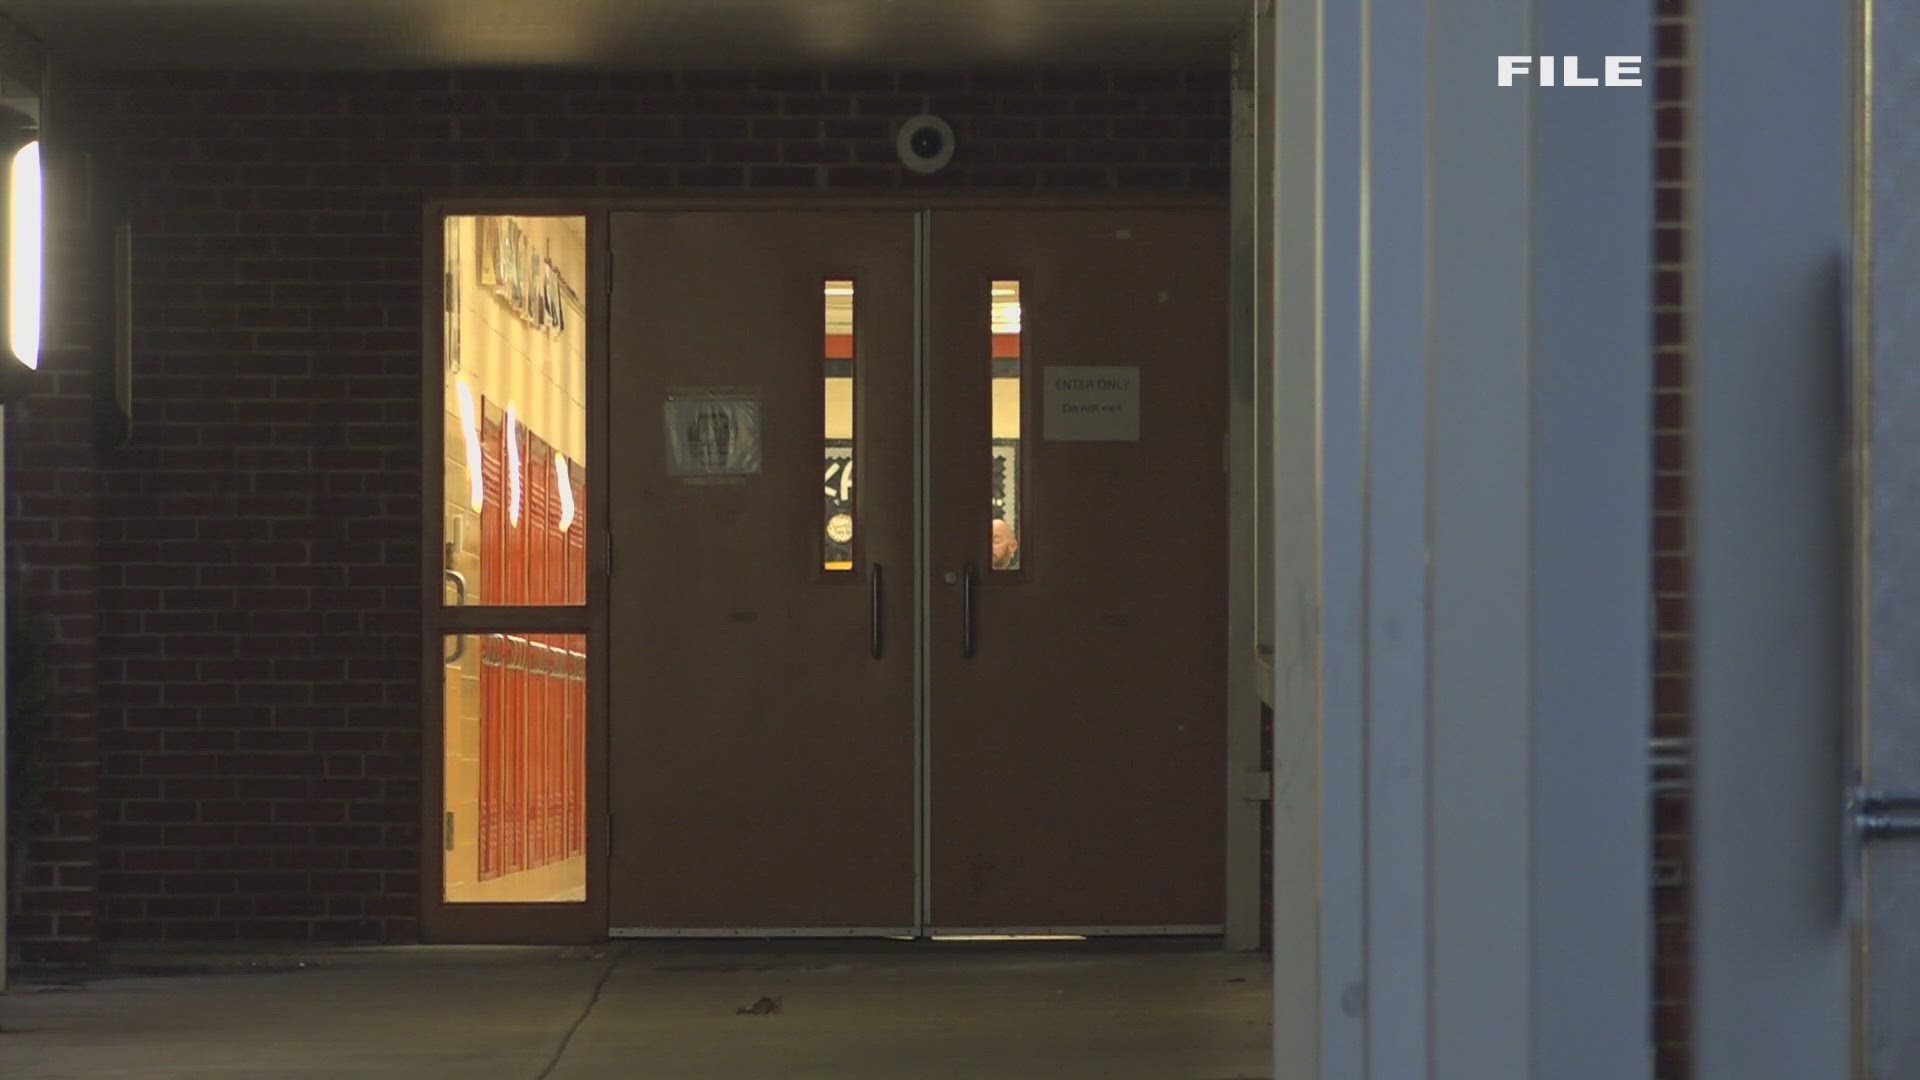 Some school board members said the upgrades are long overdue.